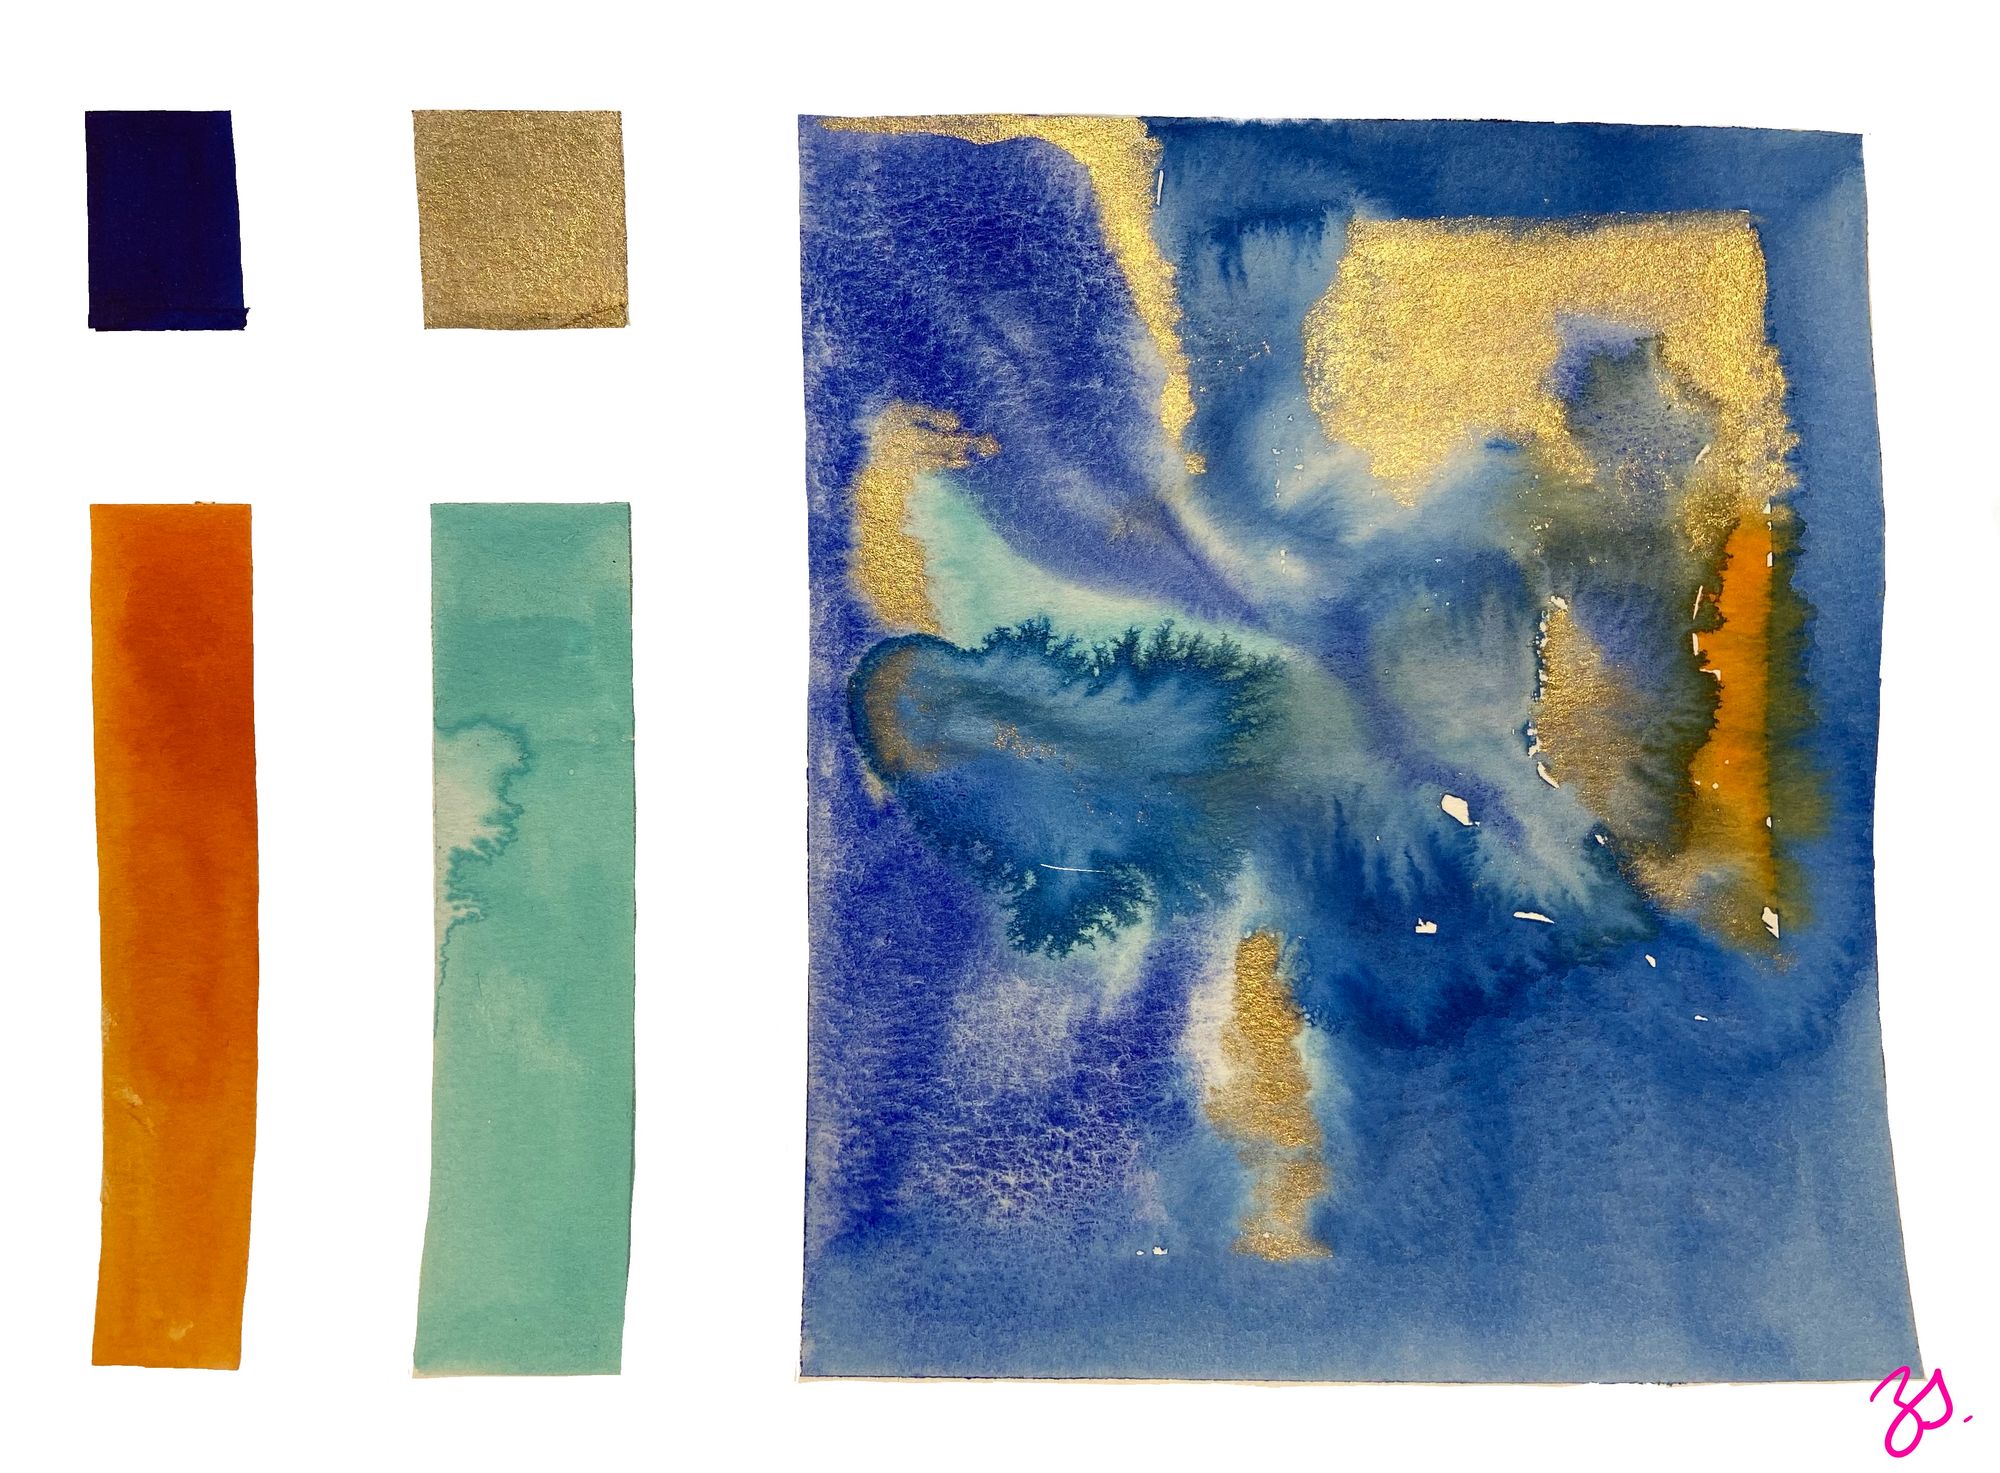 On a white background, pieces of watercolour paper are laid out across the image. The entire right half of the image is taken up with one rectangle painted in different shades of blue, swirling into orange and gold. Wet-on-wet watercolour technique creates shapes that bloom like frost on a window. On the left are two smaller strips of orange and teal.